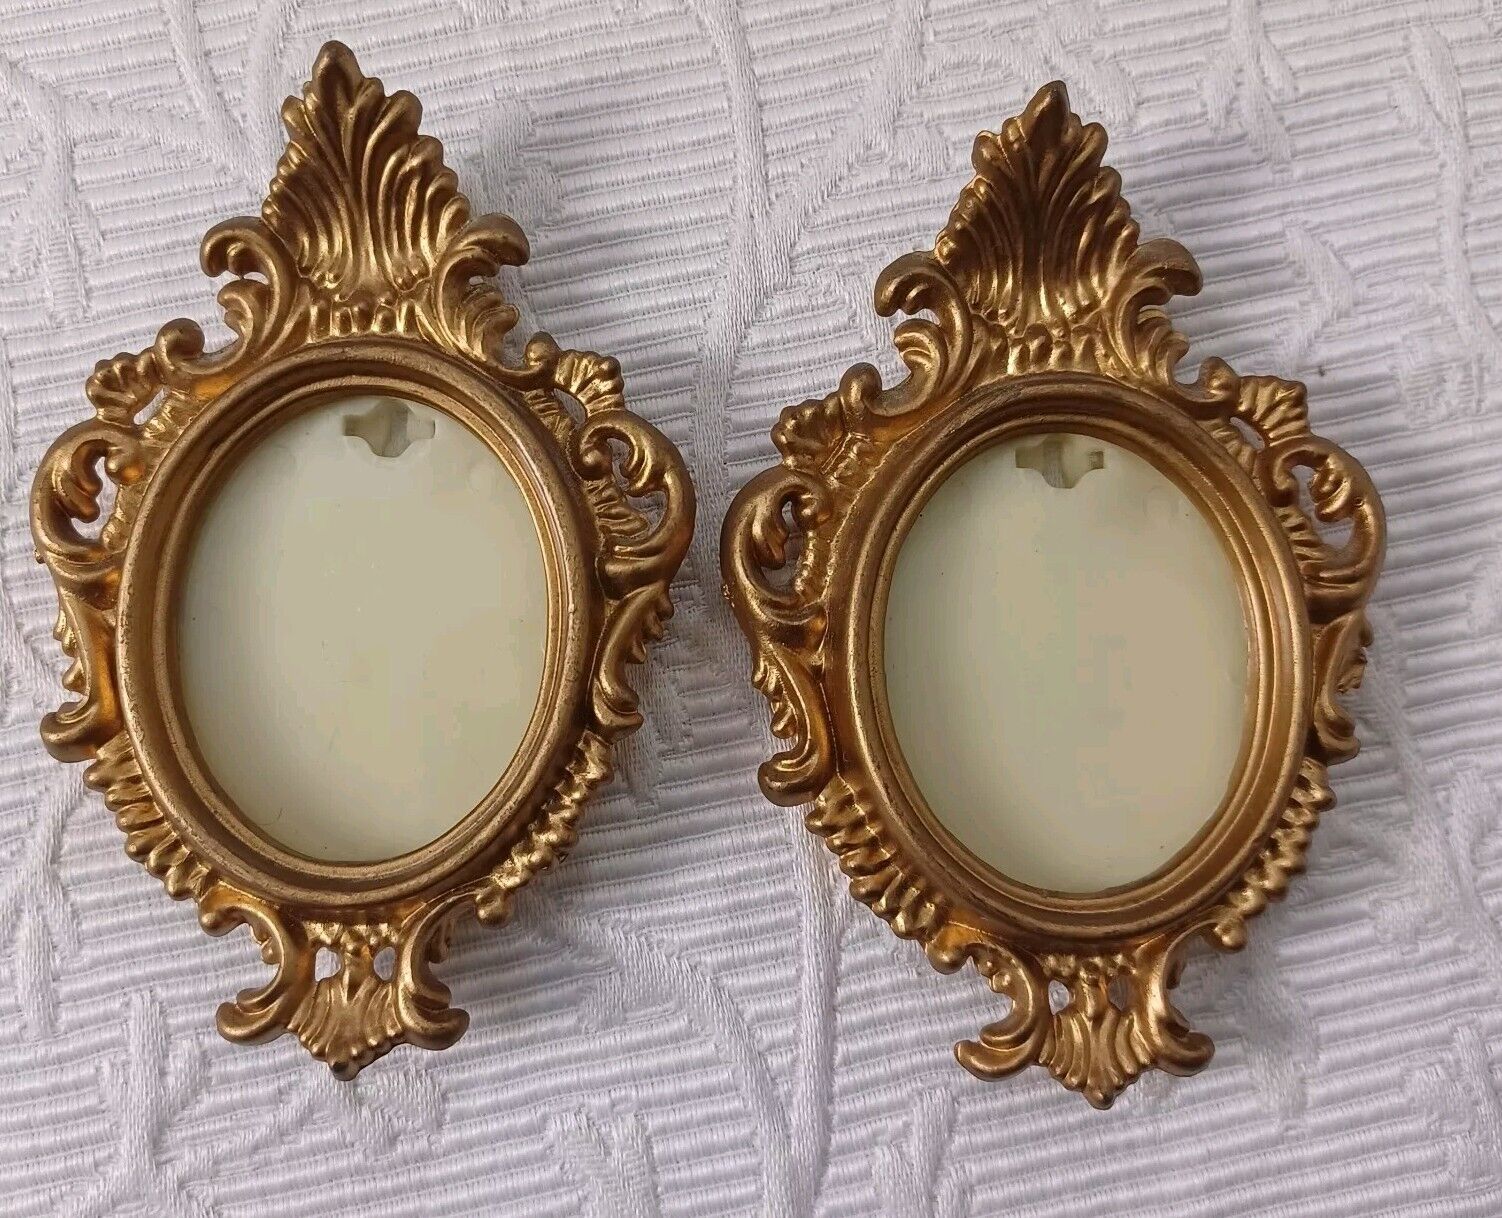 VINTAGE Set 2 GOLD VICTORIAN STYLE PHOTO FRAME ORNATE MOLDED PLASTIC GLASS Small